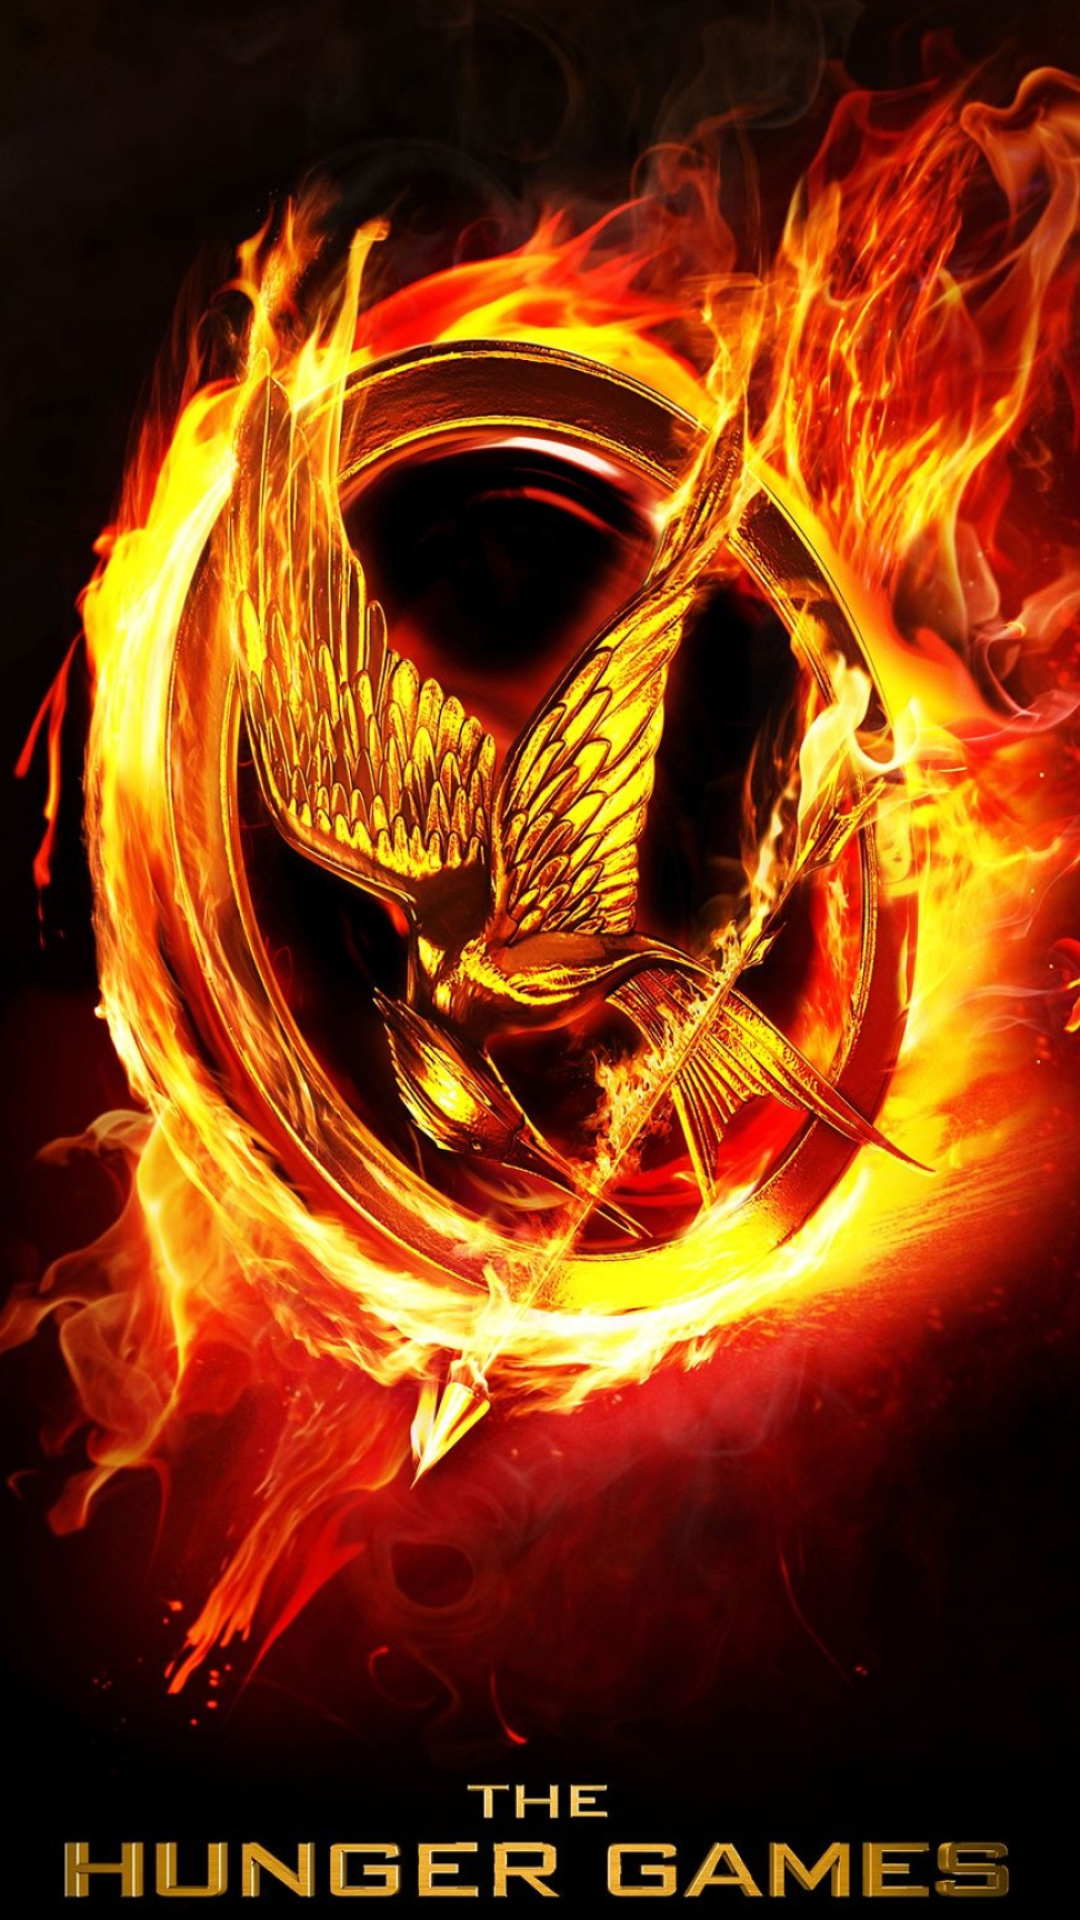 Hunger Games: The film is based on the 2009 novel Catching Fire by Suzanne Collins. 1080x1920 Full HD Wallpaper.